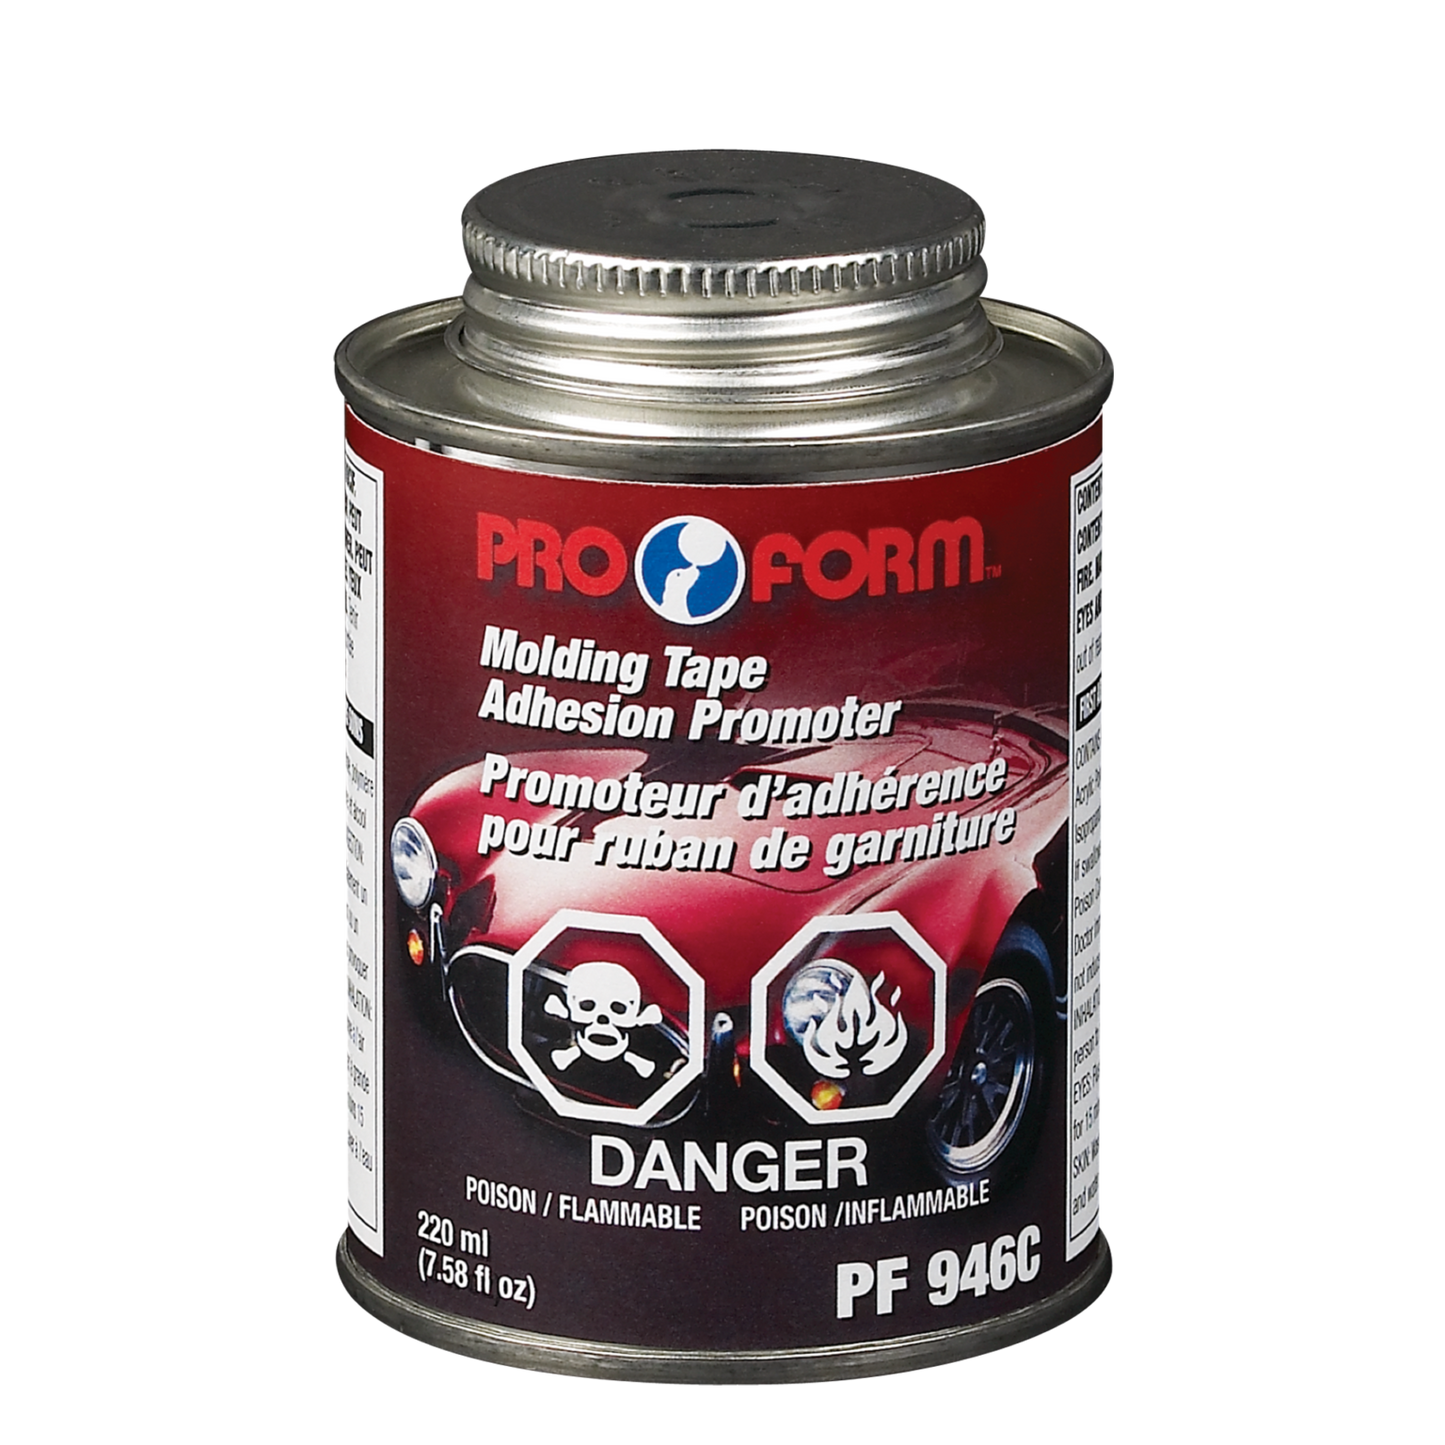 Adhesion promoter for trim tape